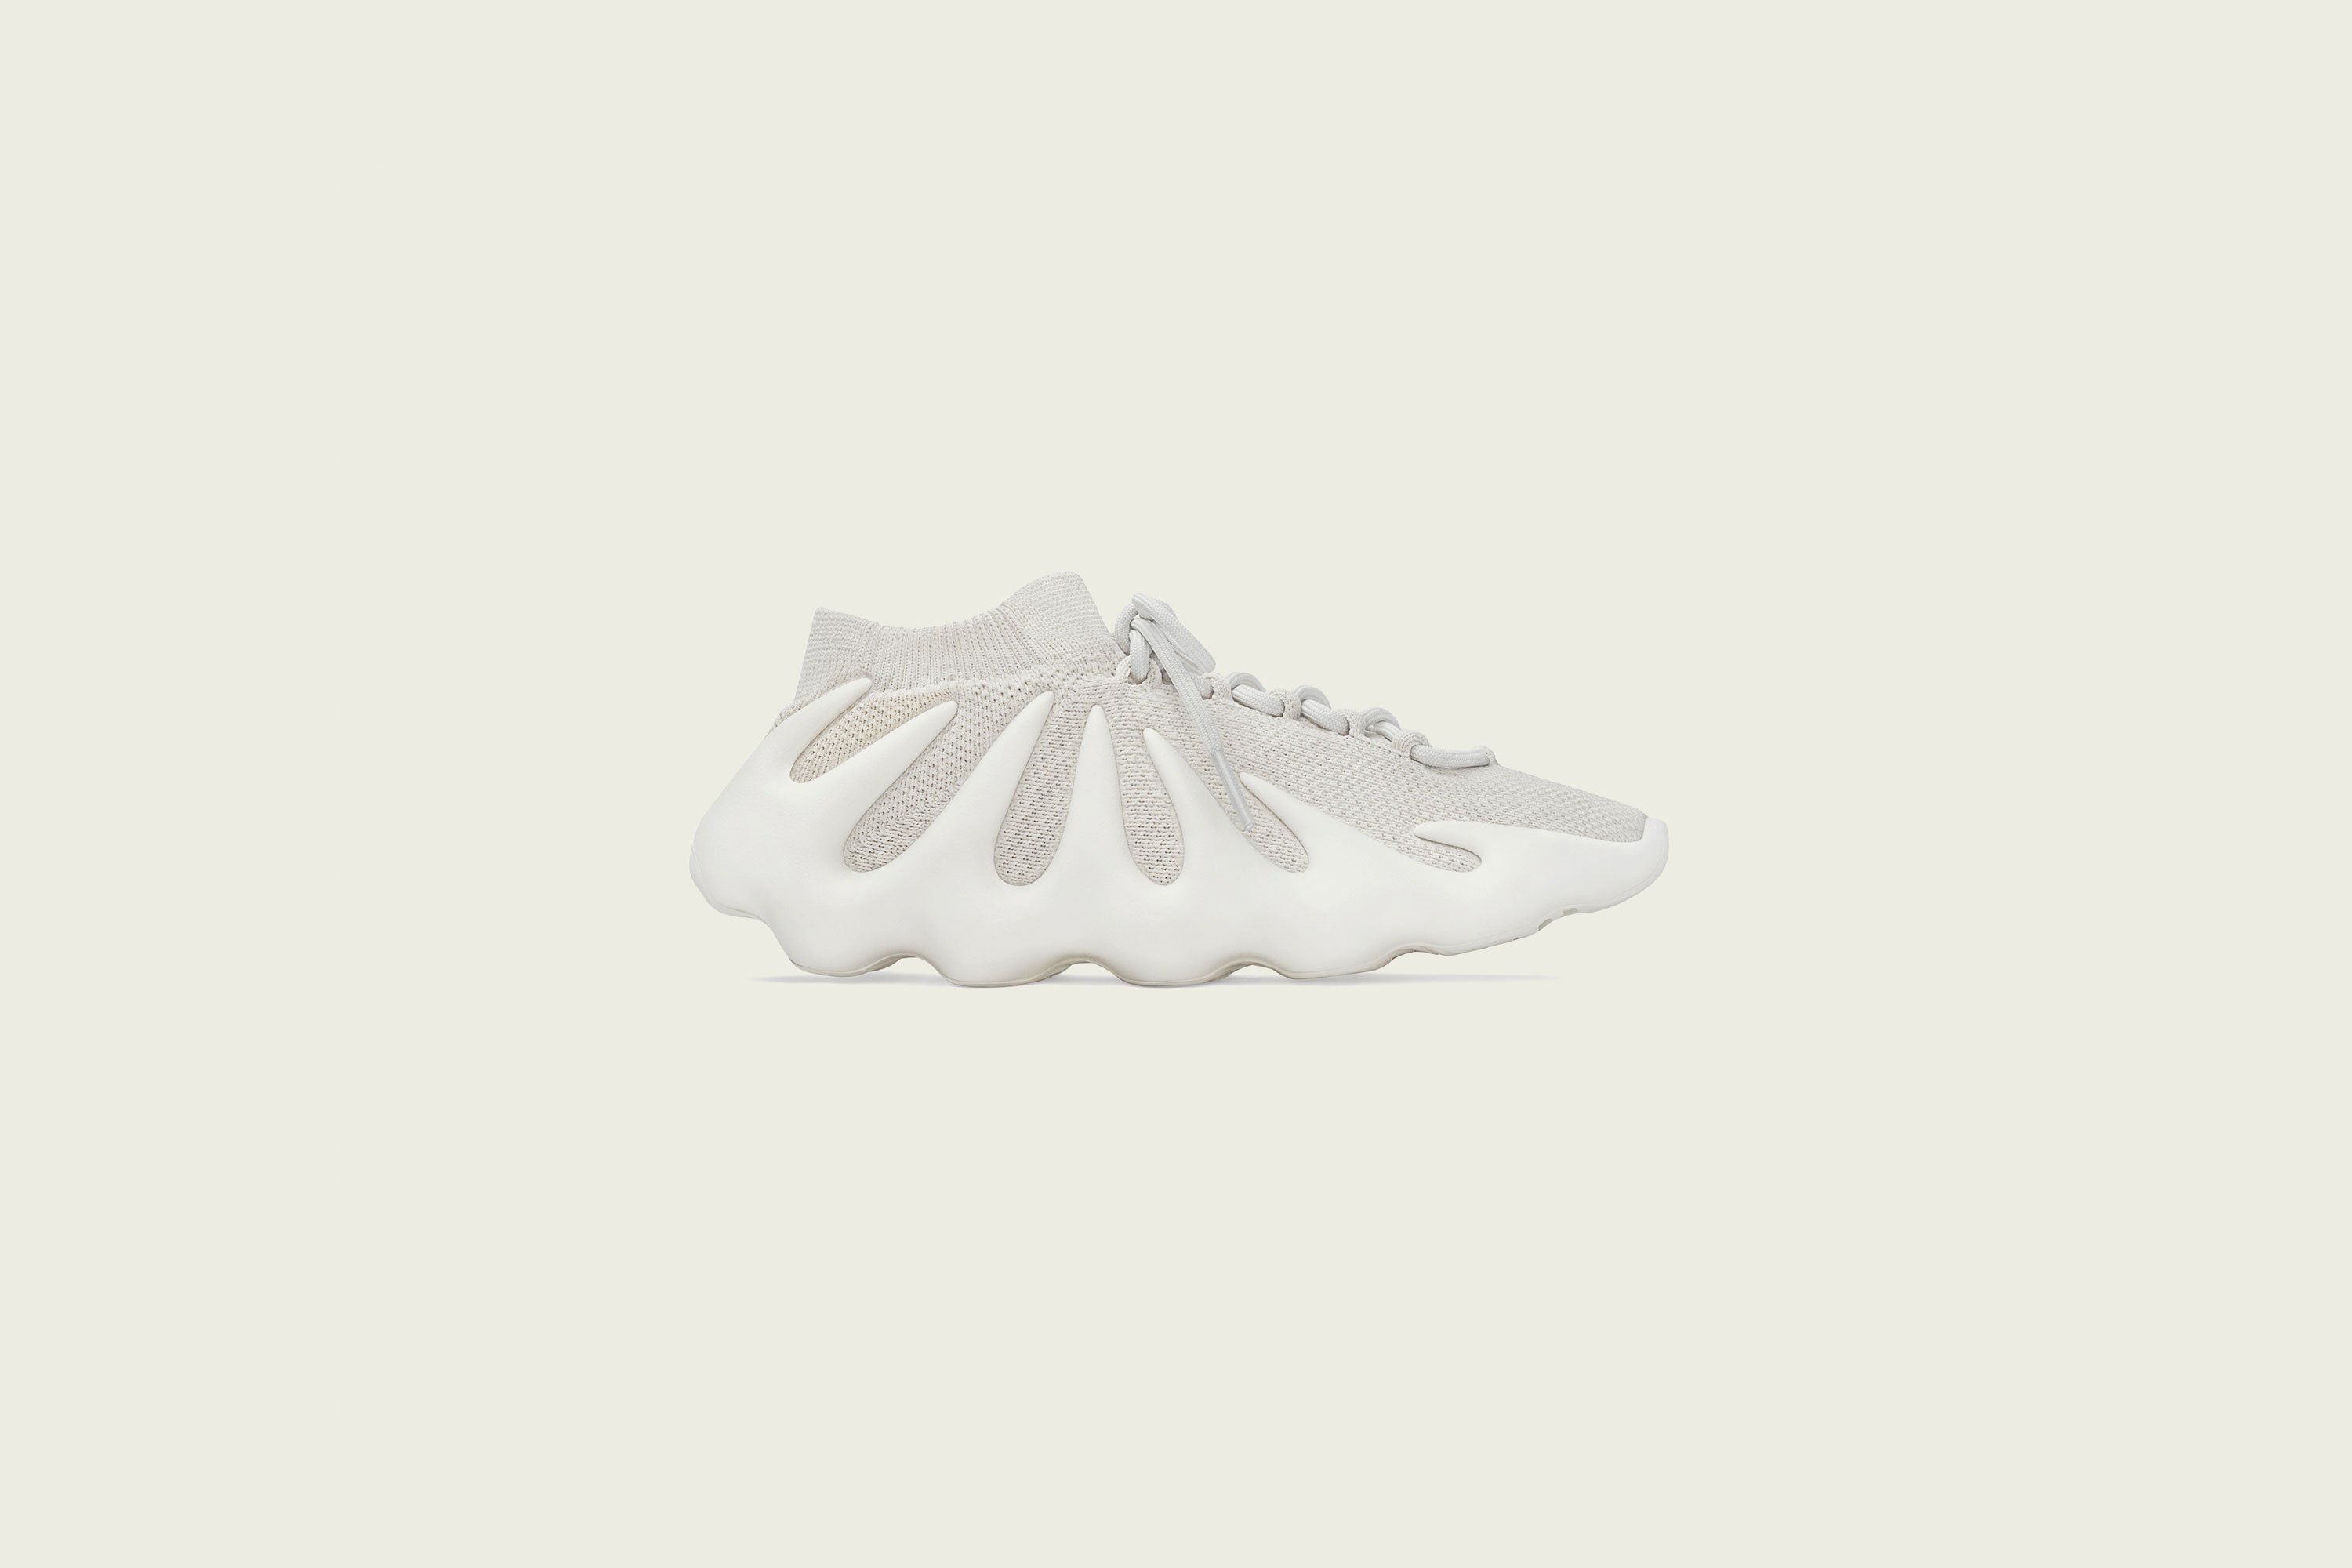 Up There Launches - adidas Originals Yeezy 450 'Cloud White'